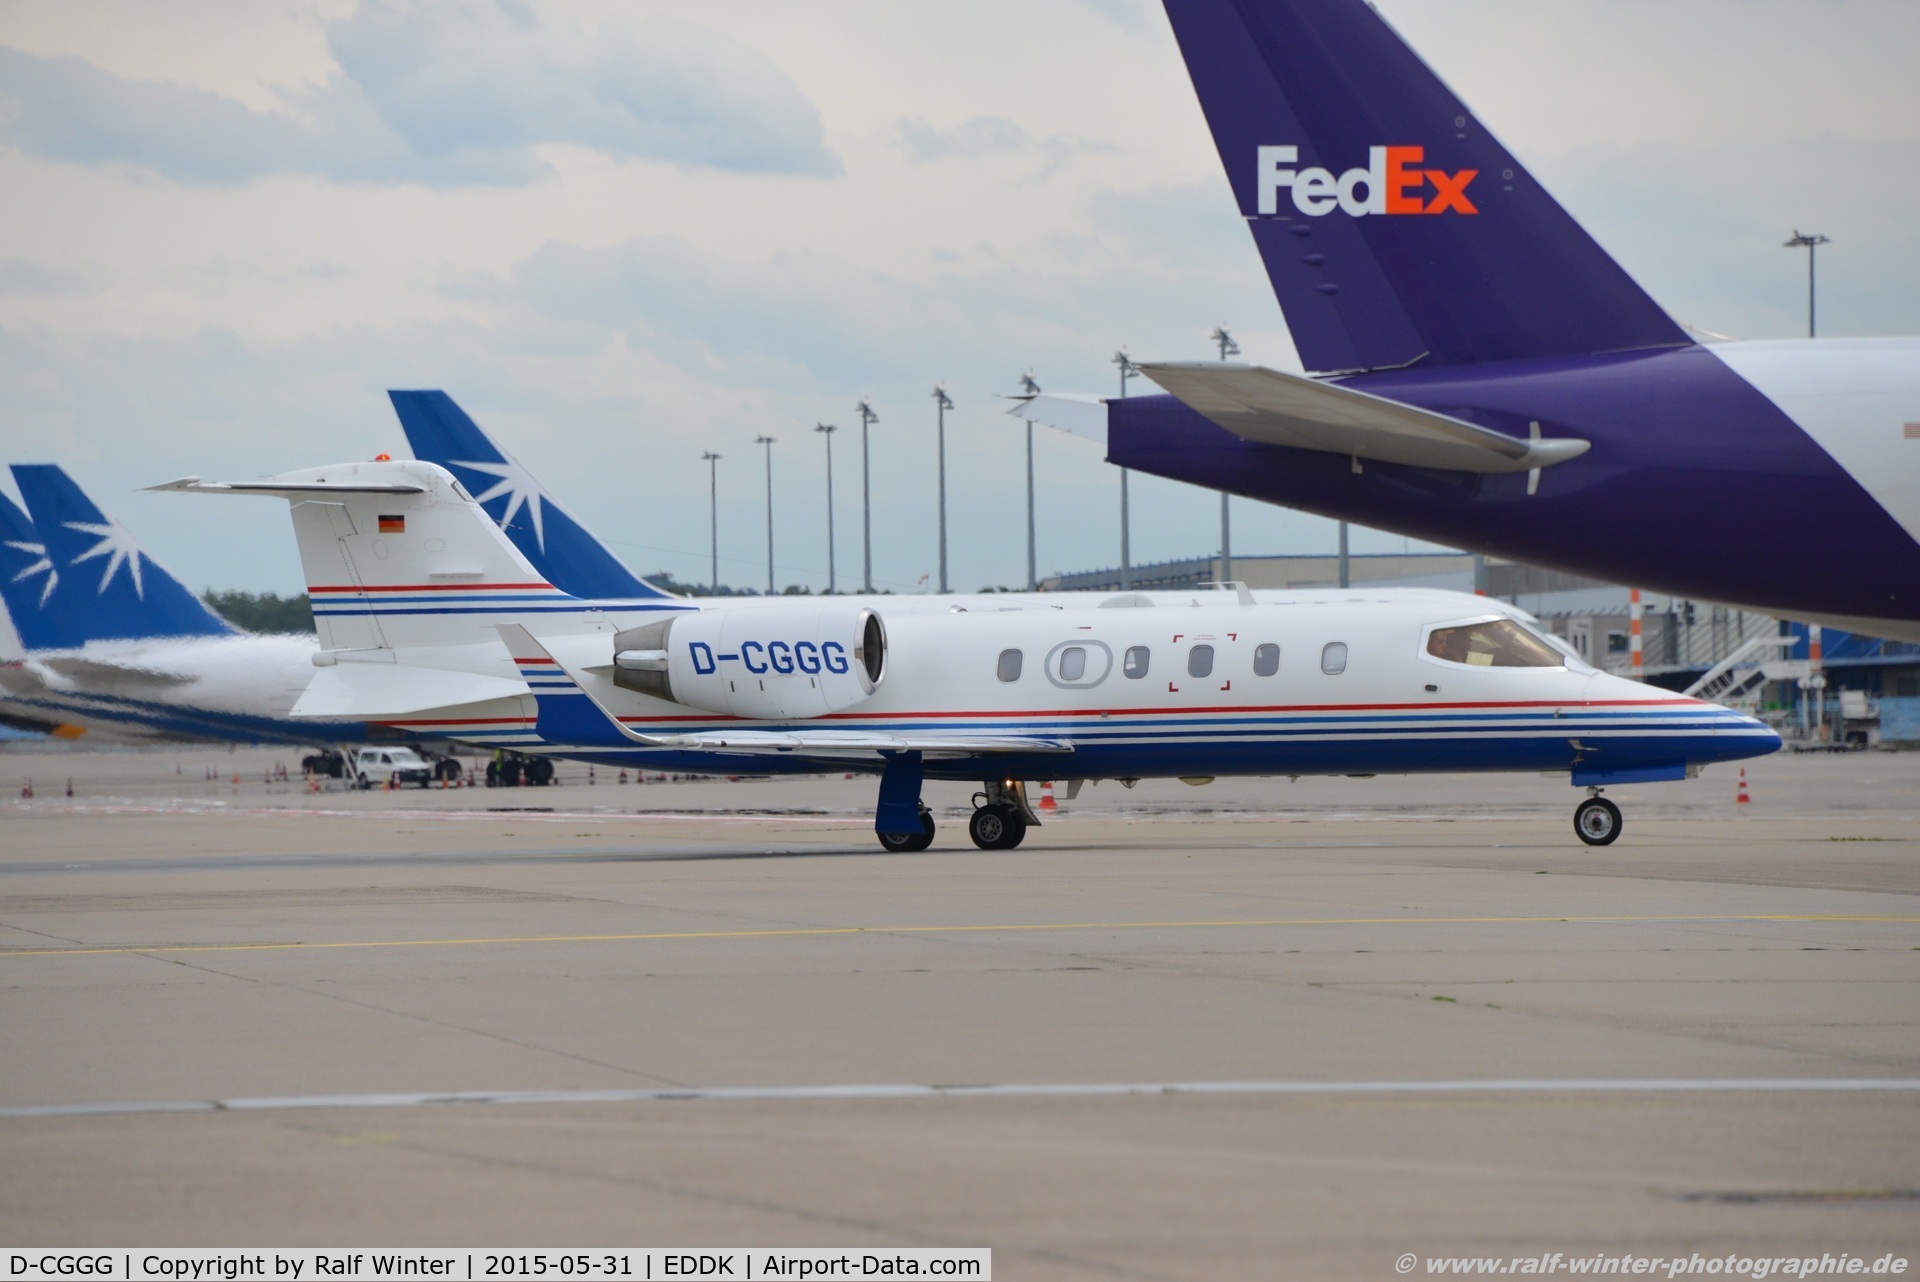 D-CGGG, 2001 Learjet 31A C/N 31A-227, Learjet 31A - JCL Jetcall - 31-227 - D-CGGG - 31.05.2015 - CGN